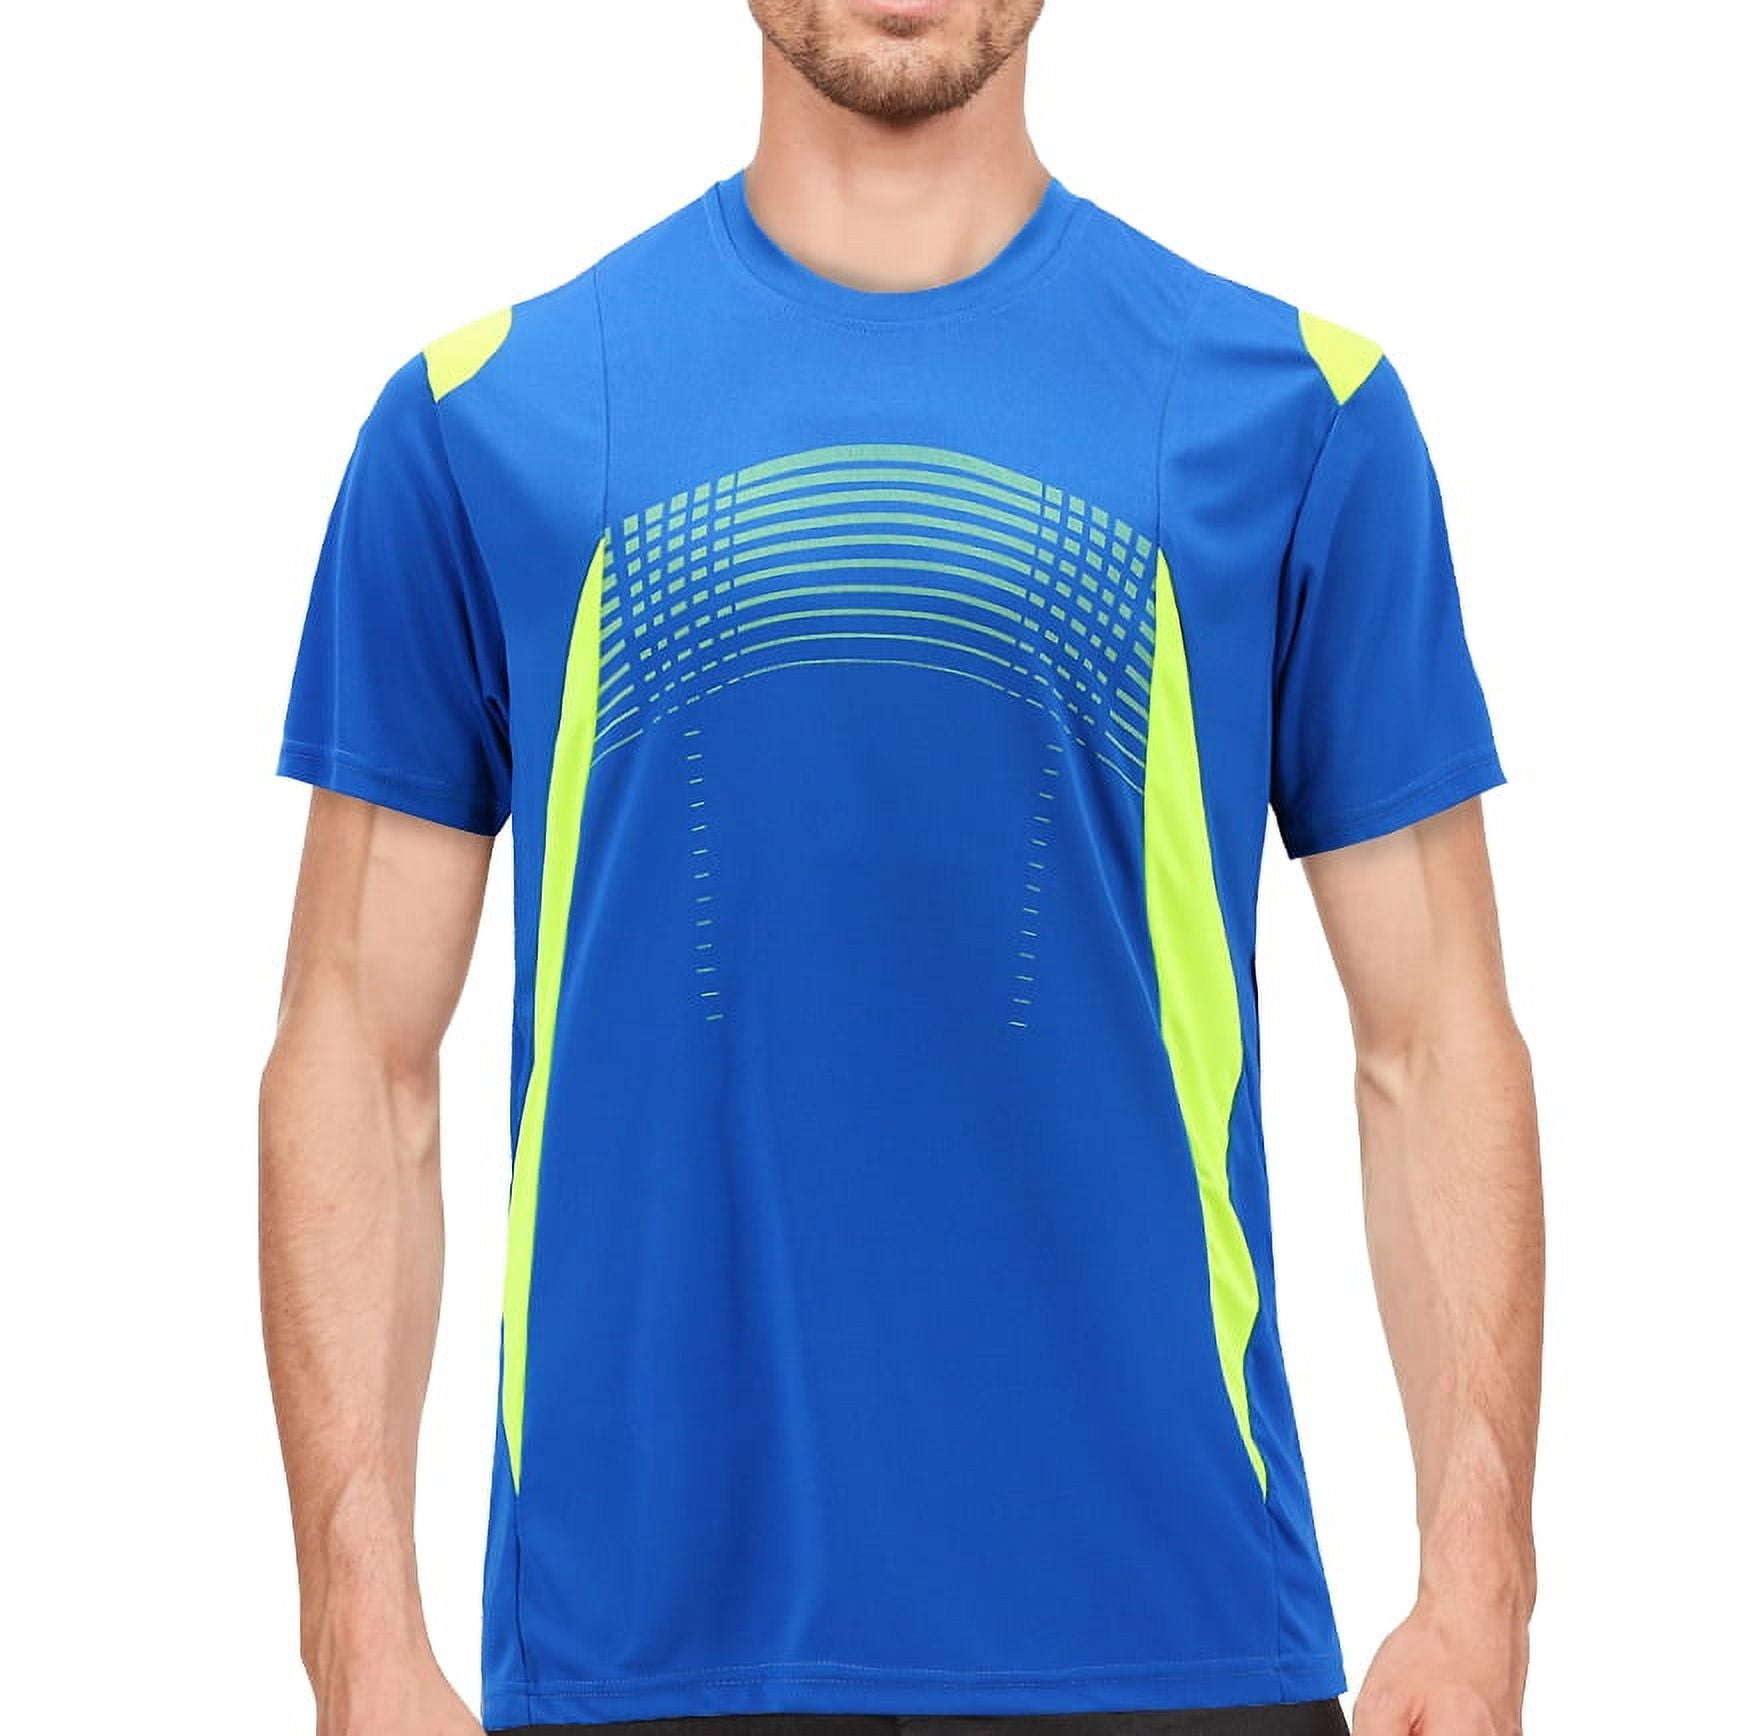 Men's Gym Workout Sport Two Tone Running Performance Quick-Dry T-shirt  (Blue, XL)